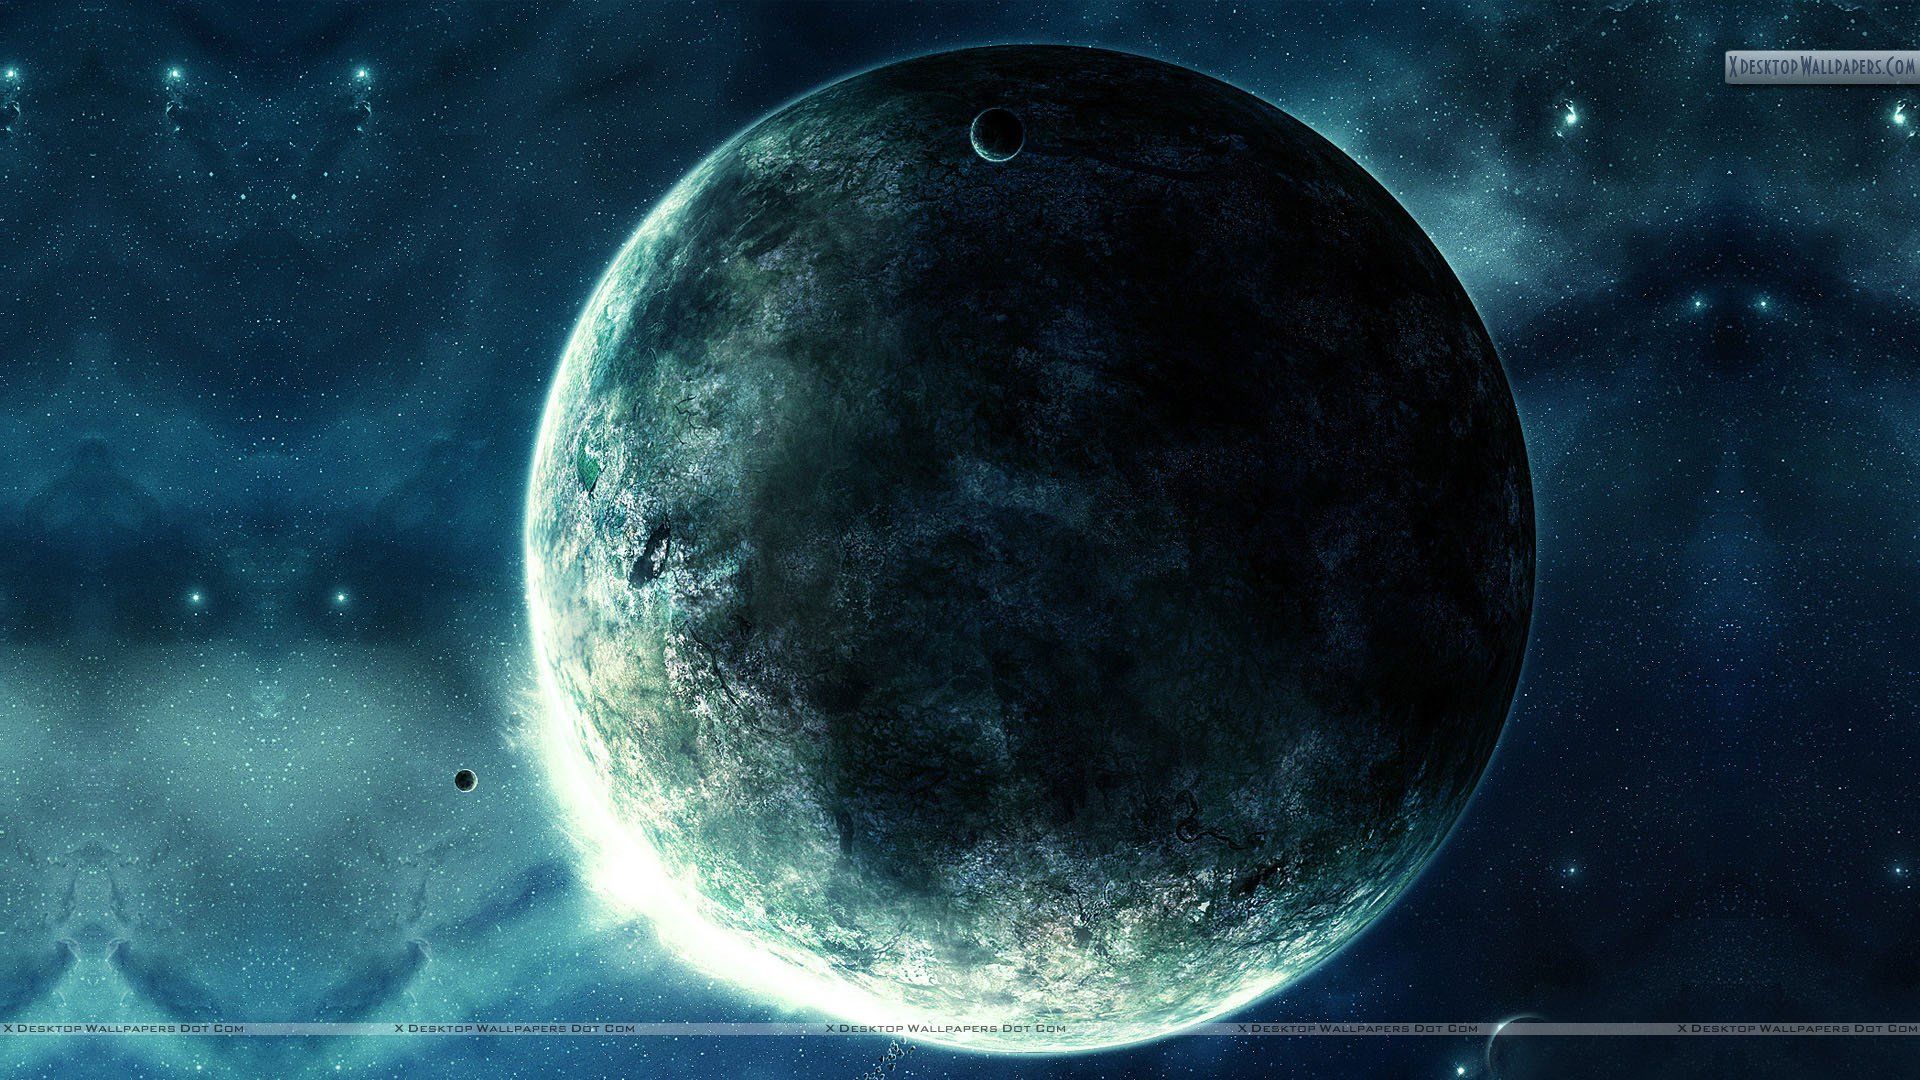 Dark Moon View From Space Wallpaper